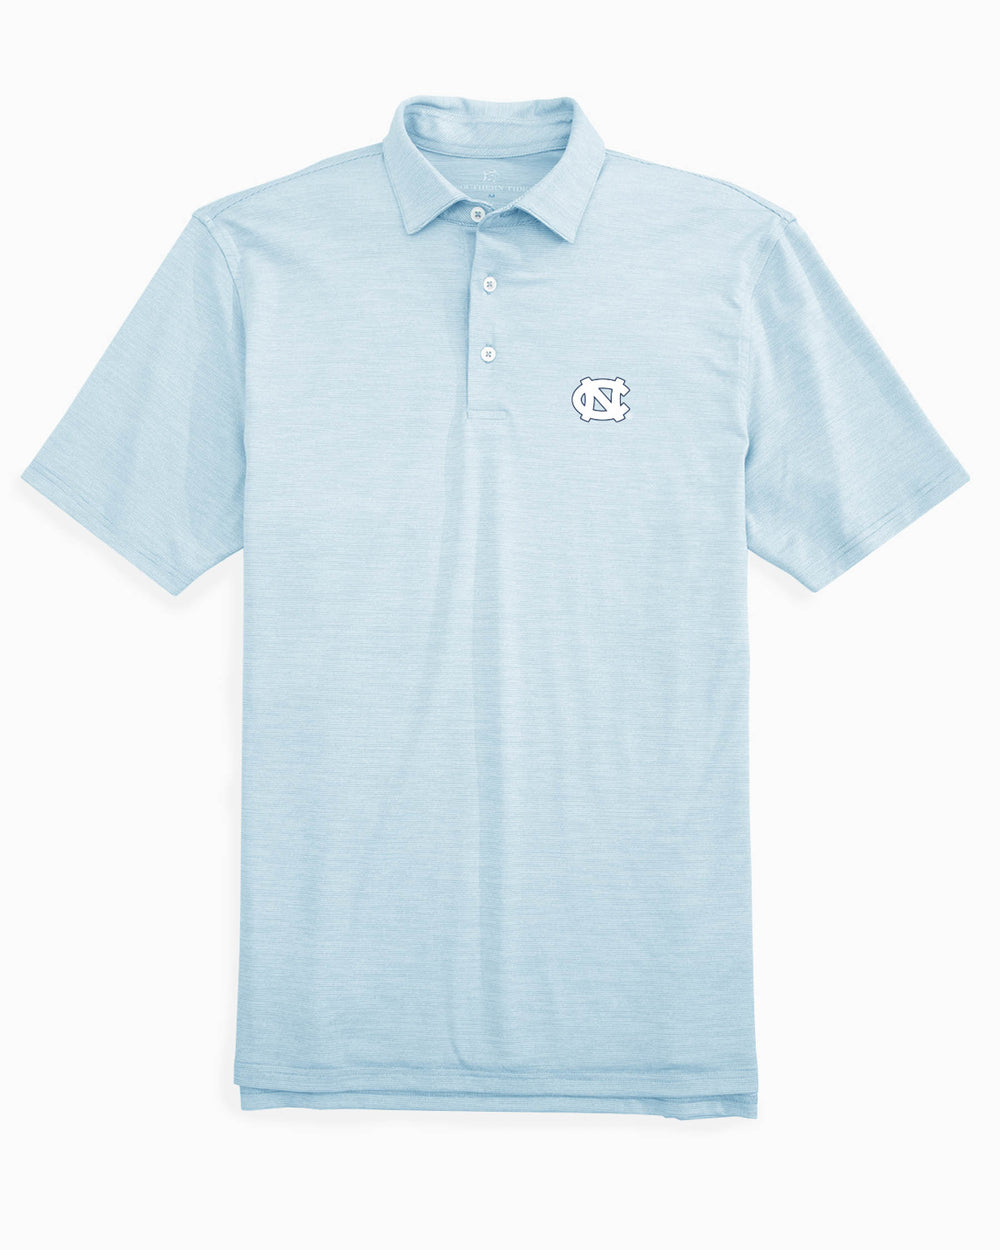 The front of the UNC Tar Heels Driver Spacedye Performance Polo Shirt by Southern Tide - Rush Blue